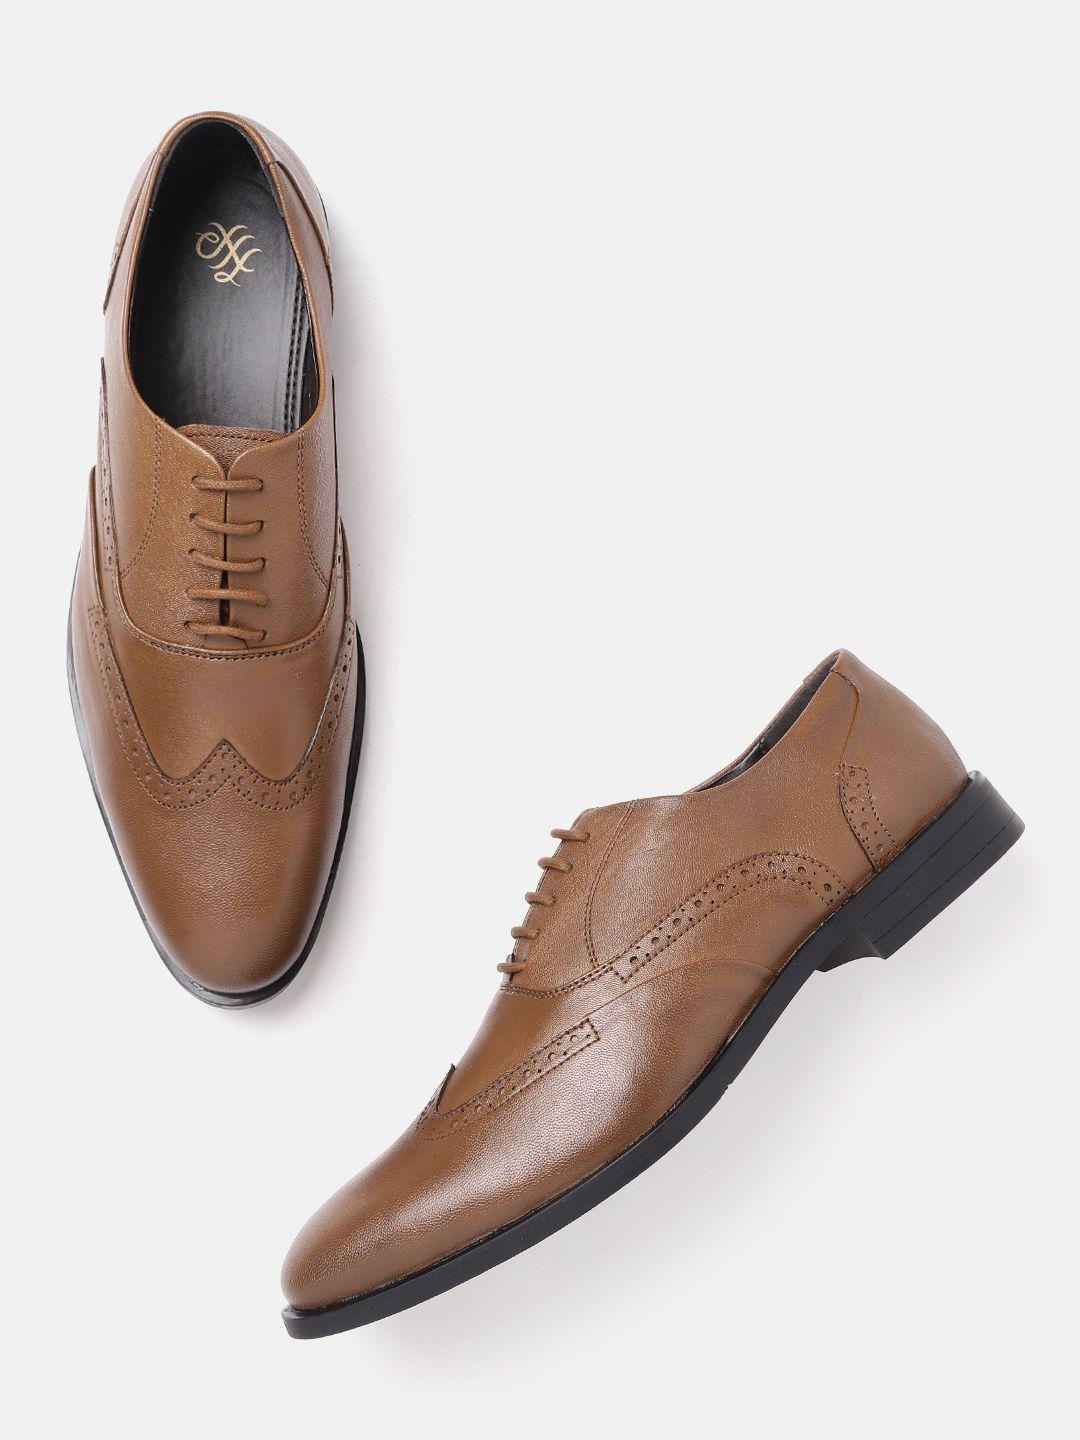 house of pataudi men tan brown leather handcrafted formal brogues